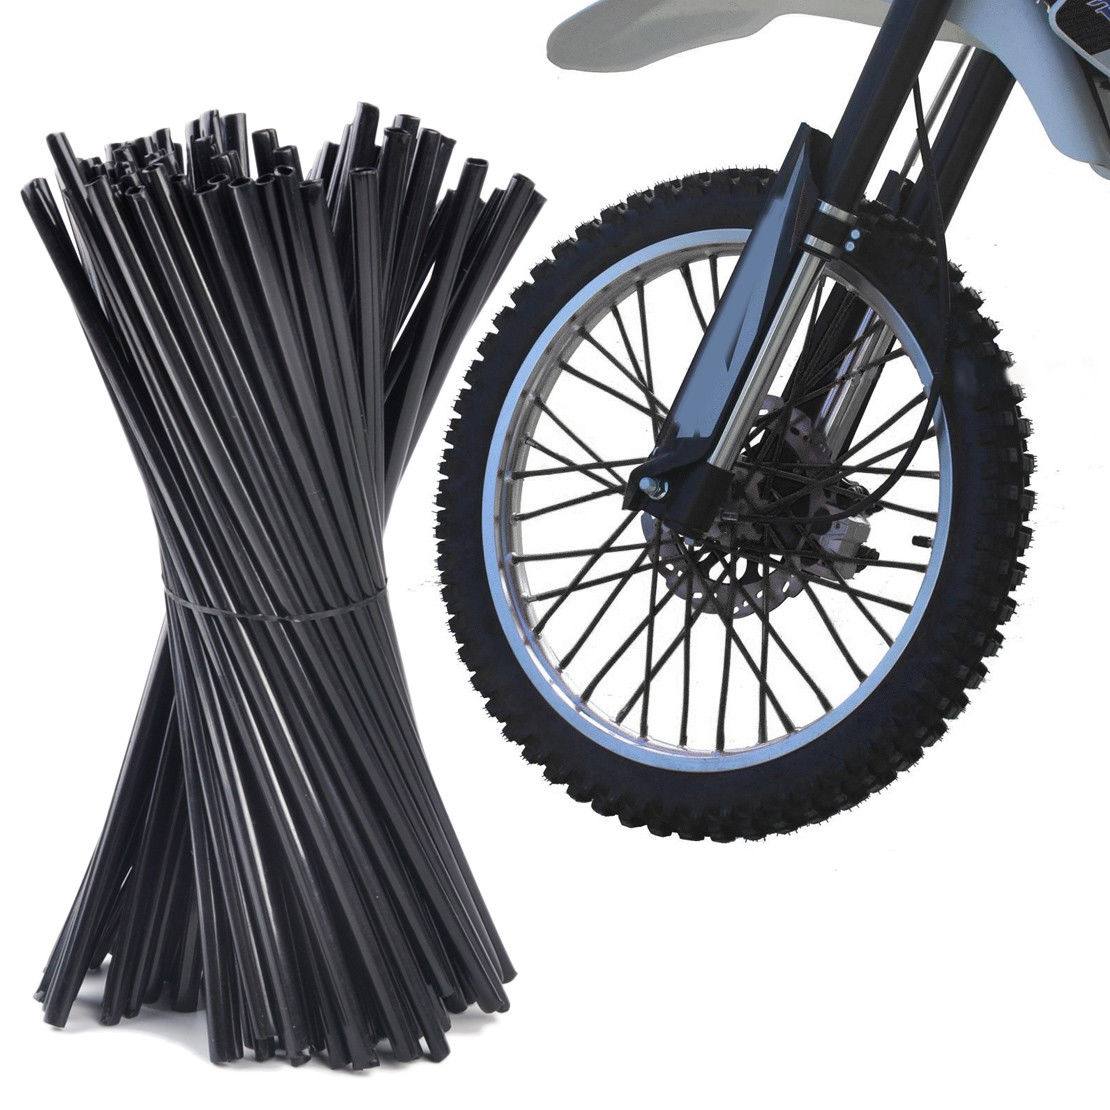 spoke covers for bicycles